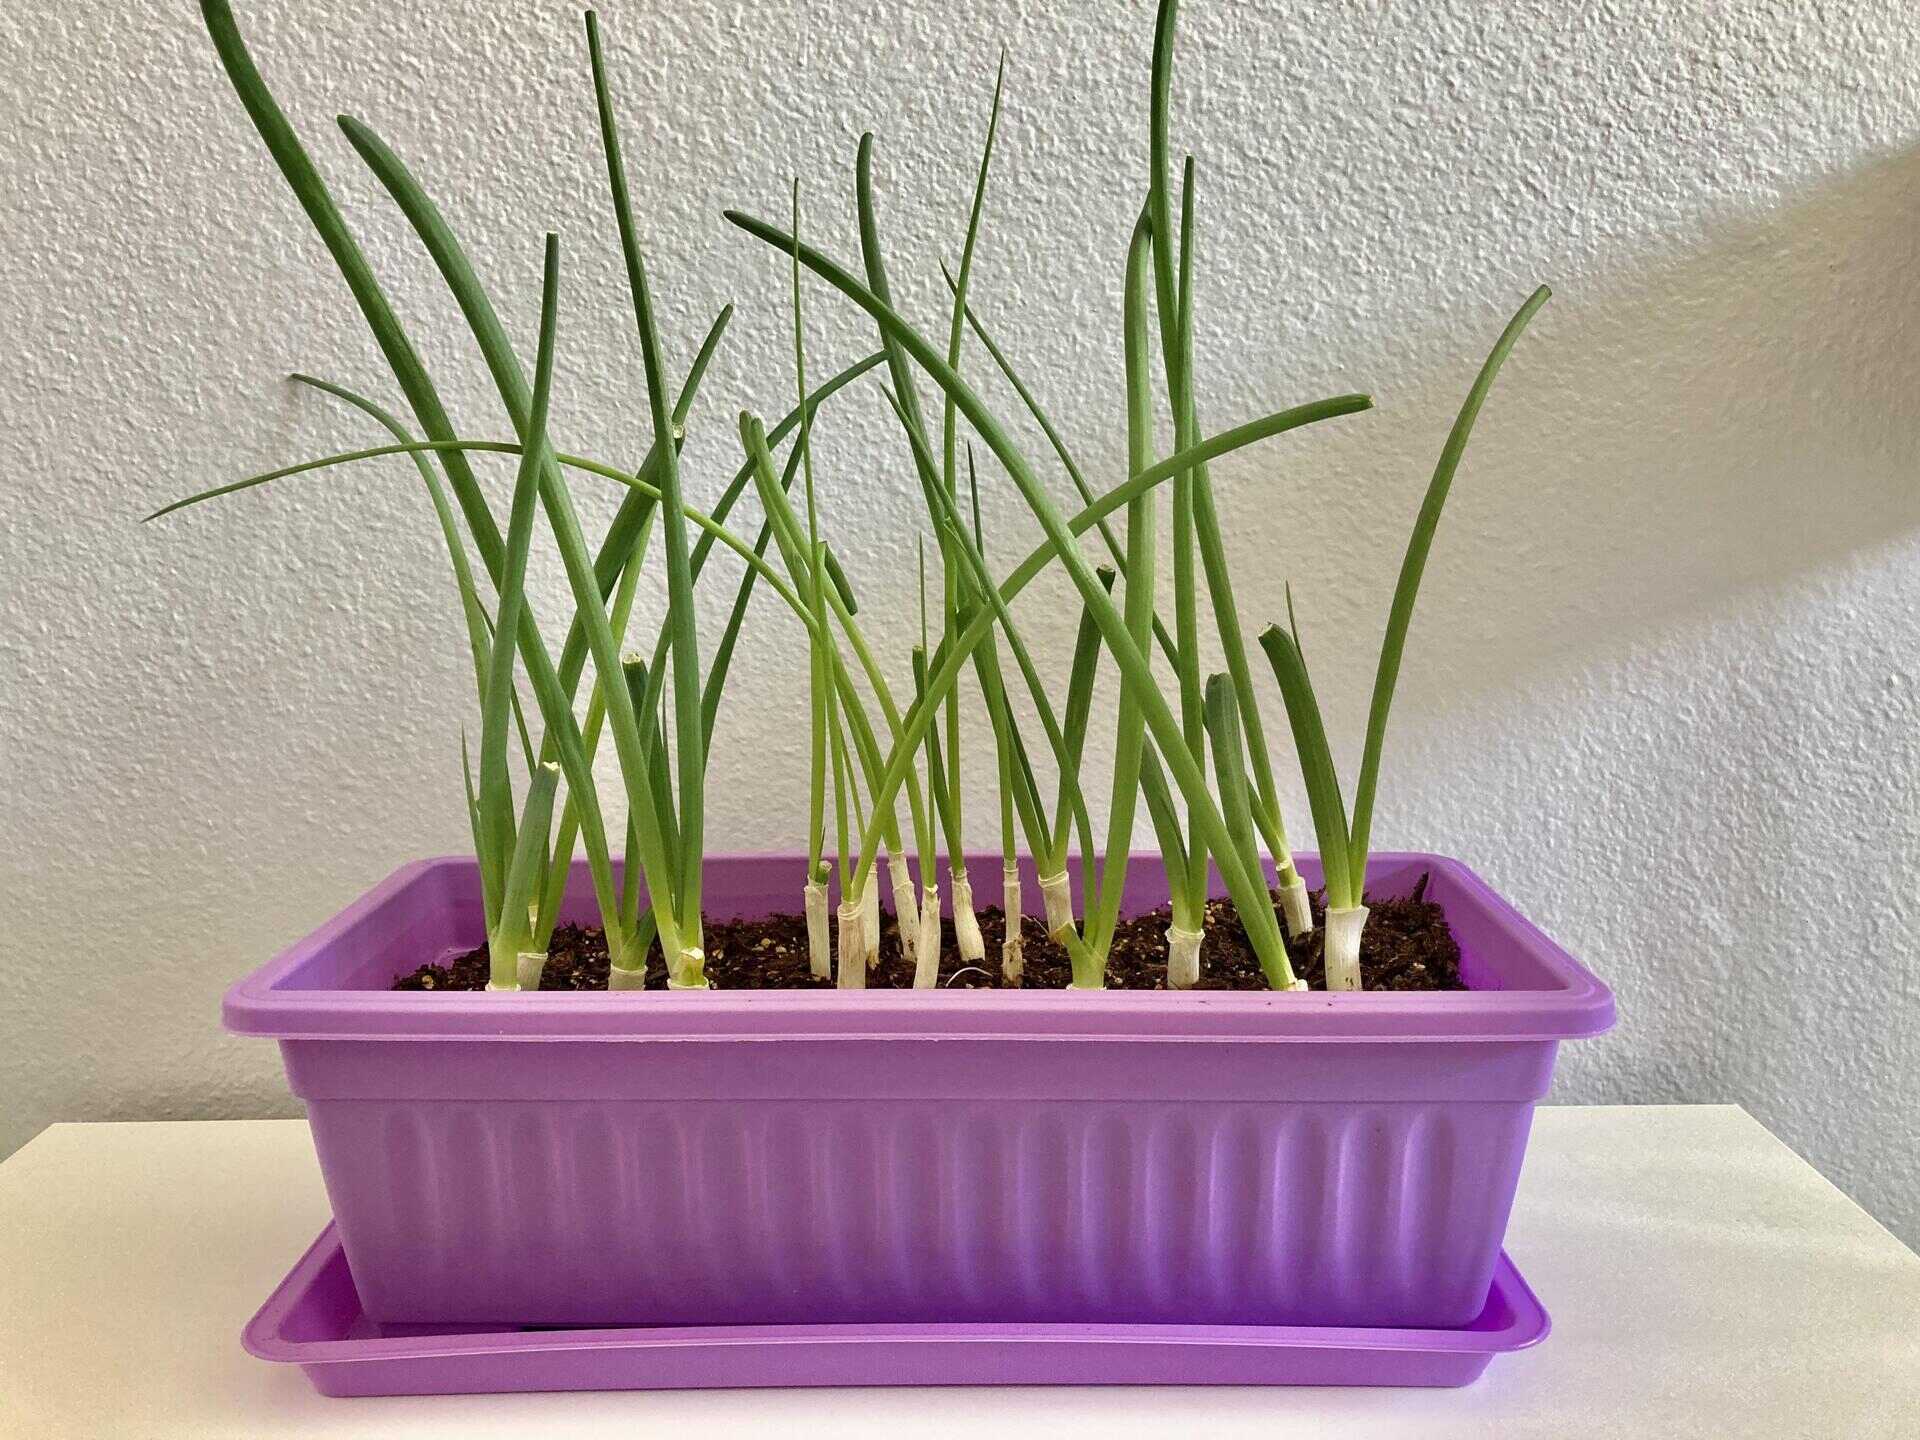 How To Plant Green Onions From Seed